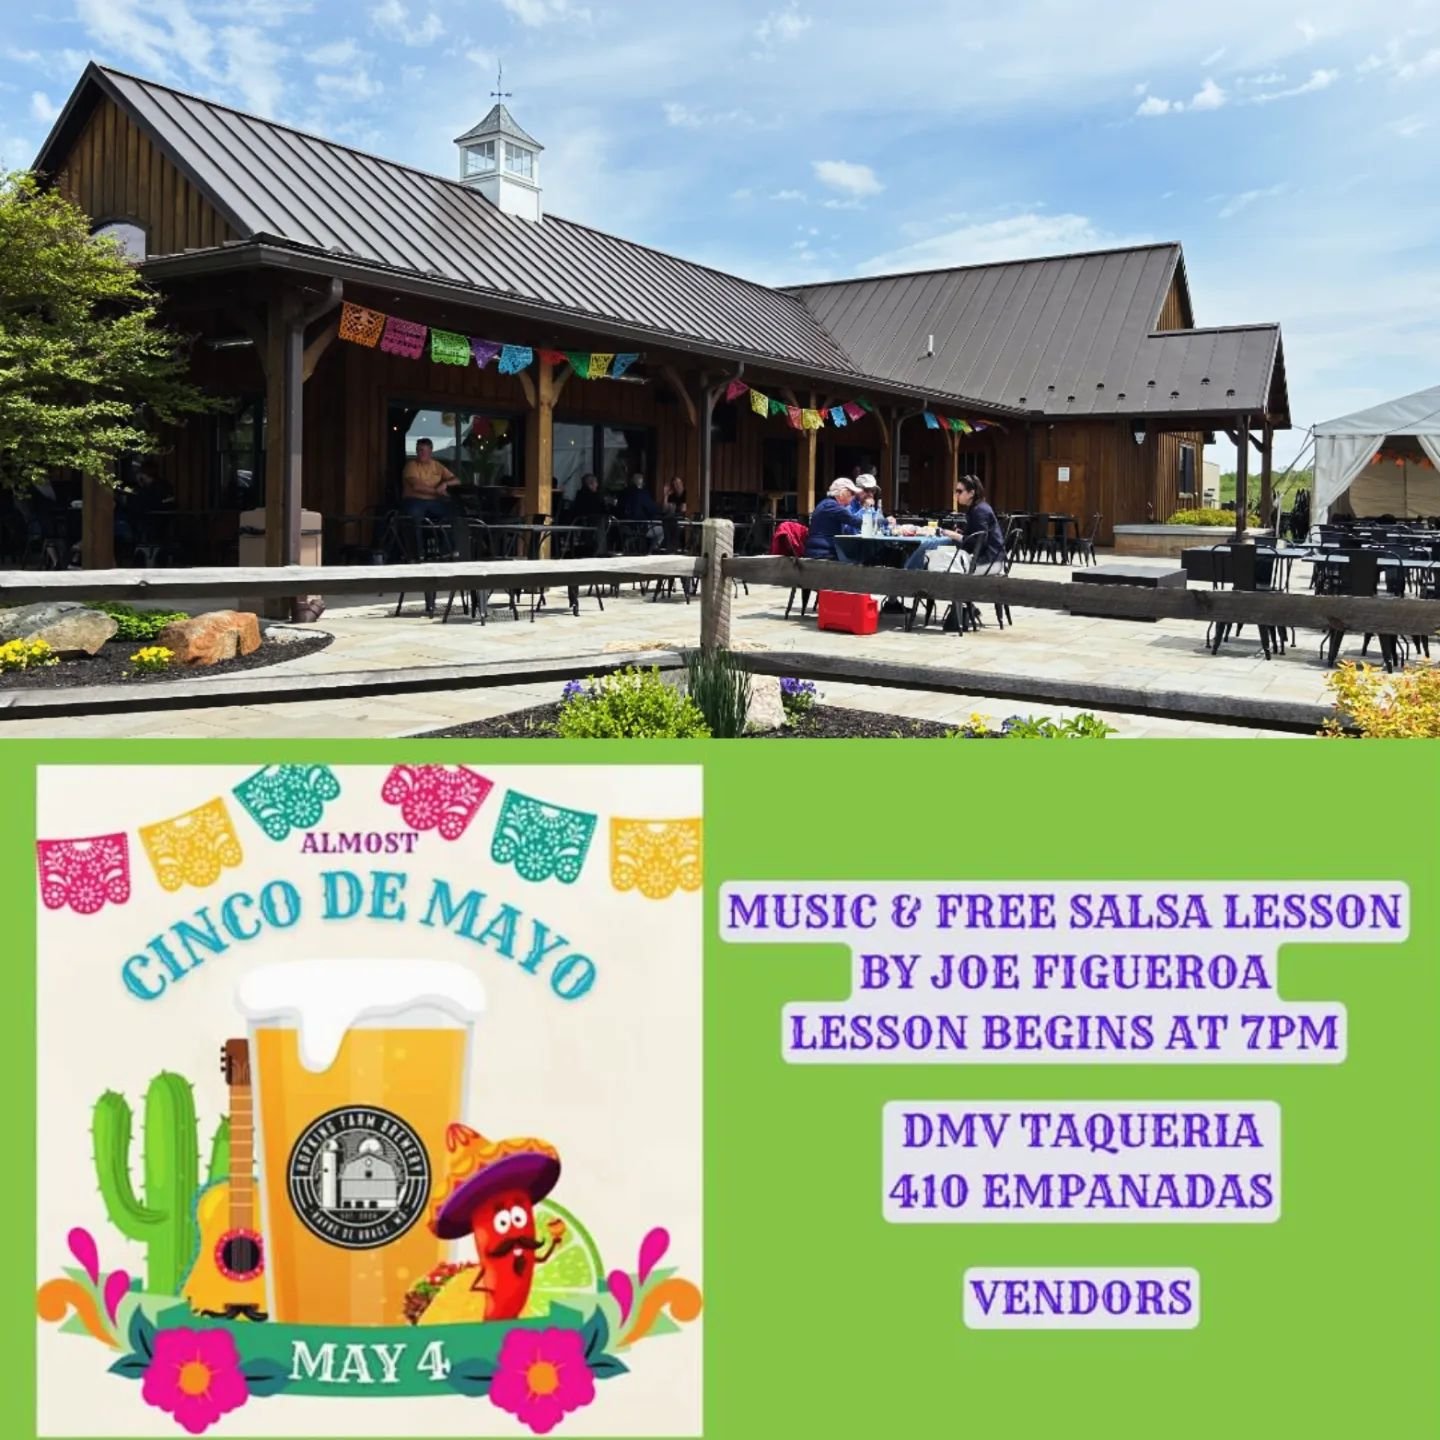 Who's excited for our Almost Cinco de Mayo Fiesta tomorrow, May 4th?! 

We'll have @dmv_taqueria and @410Empanadas food trucks, vendors, music, and free salsa lessons with Joe Figueroa (lesson begins at 7PM!)